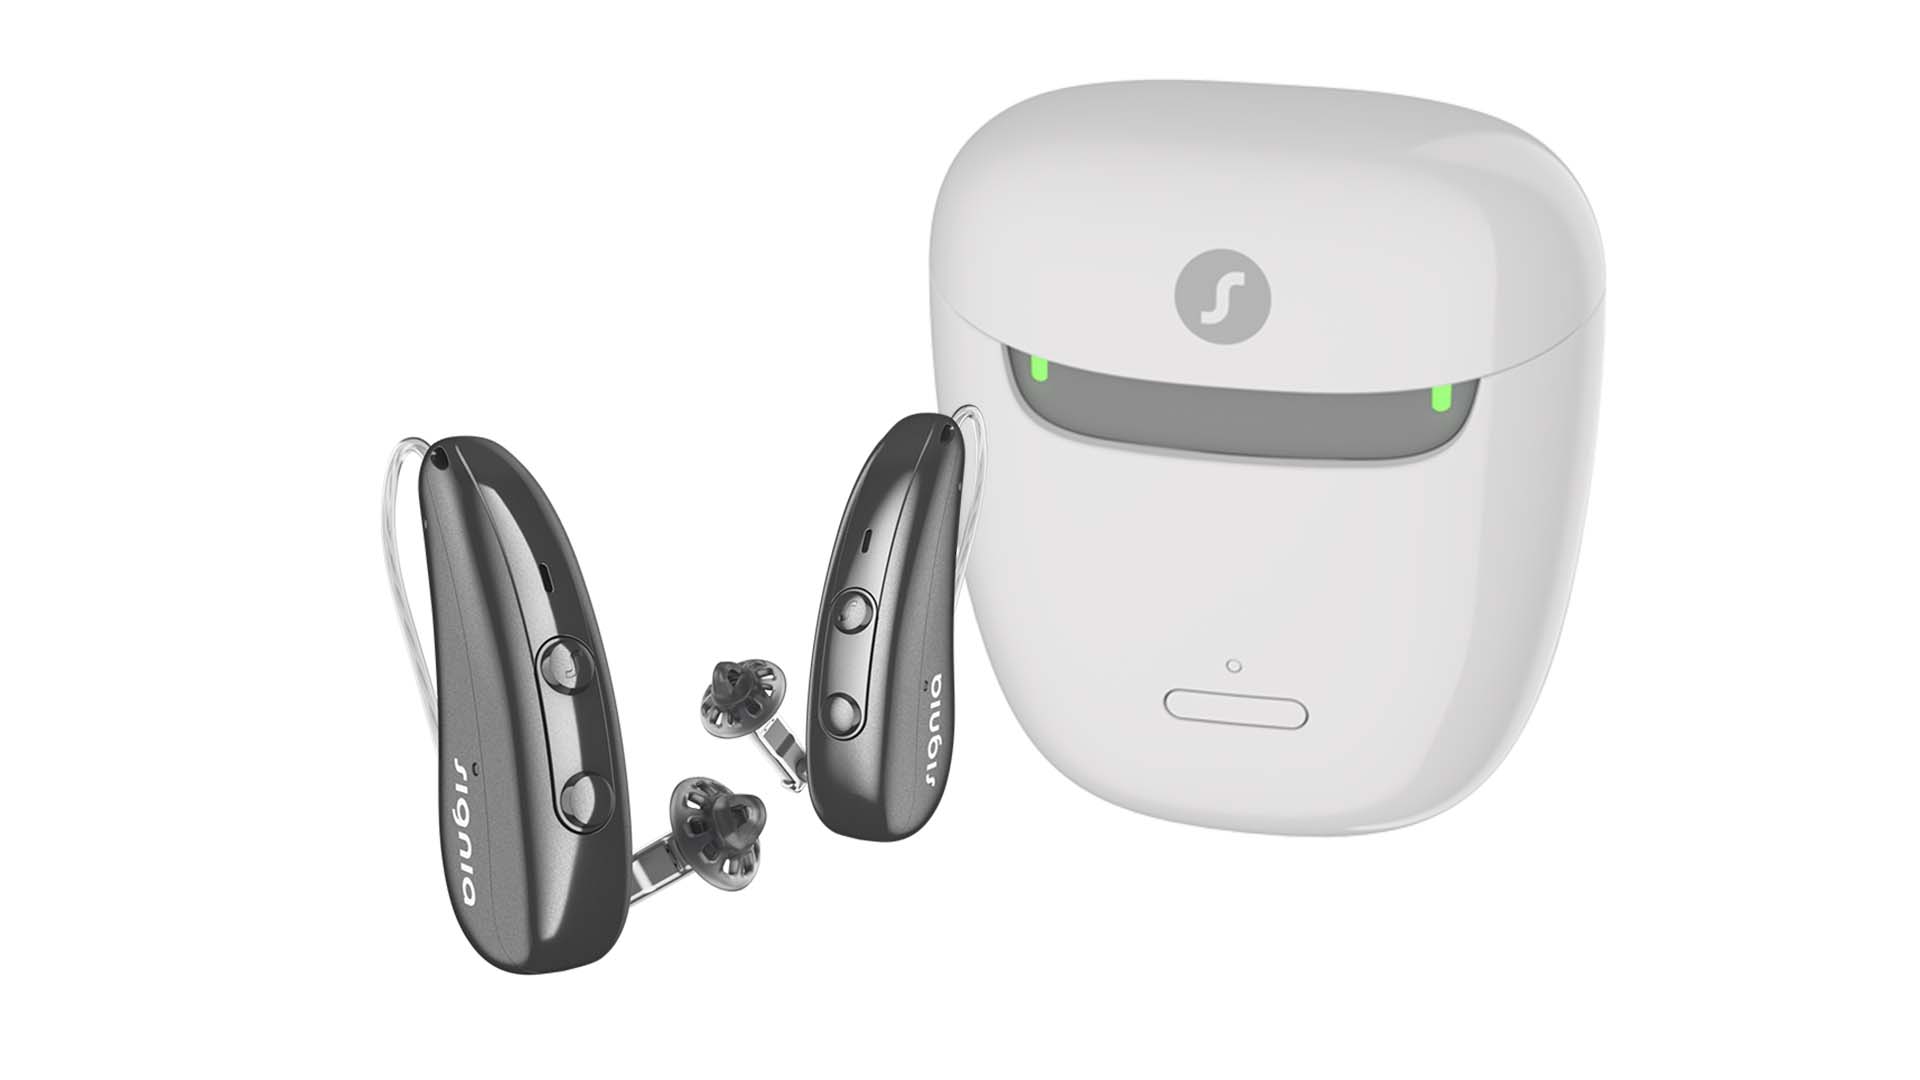 Pure Charge&Go IX hearing aids next to the Portable Charger